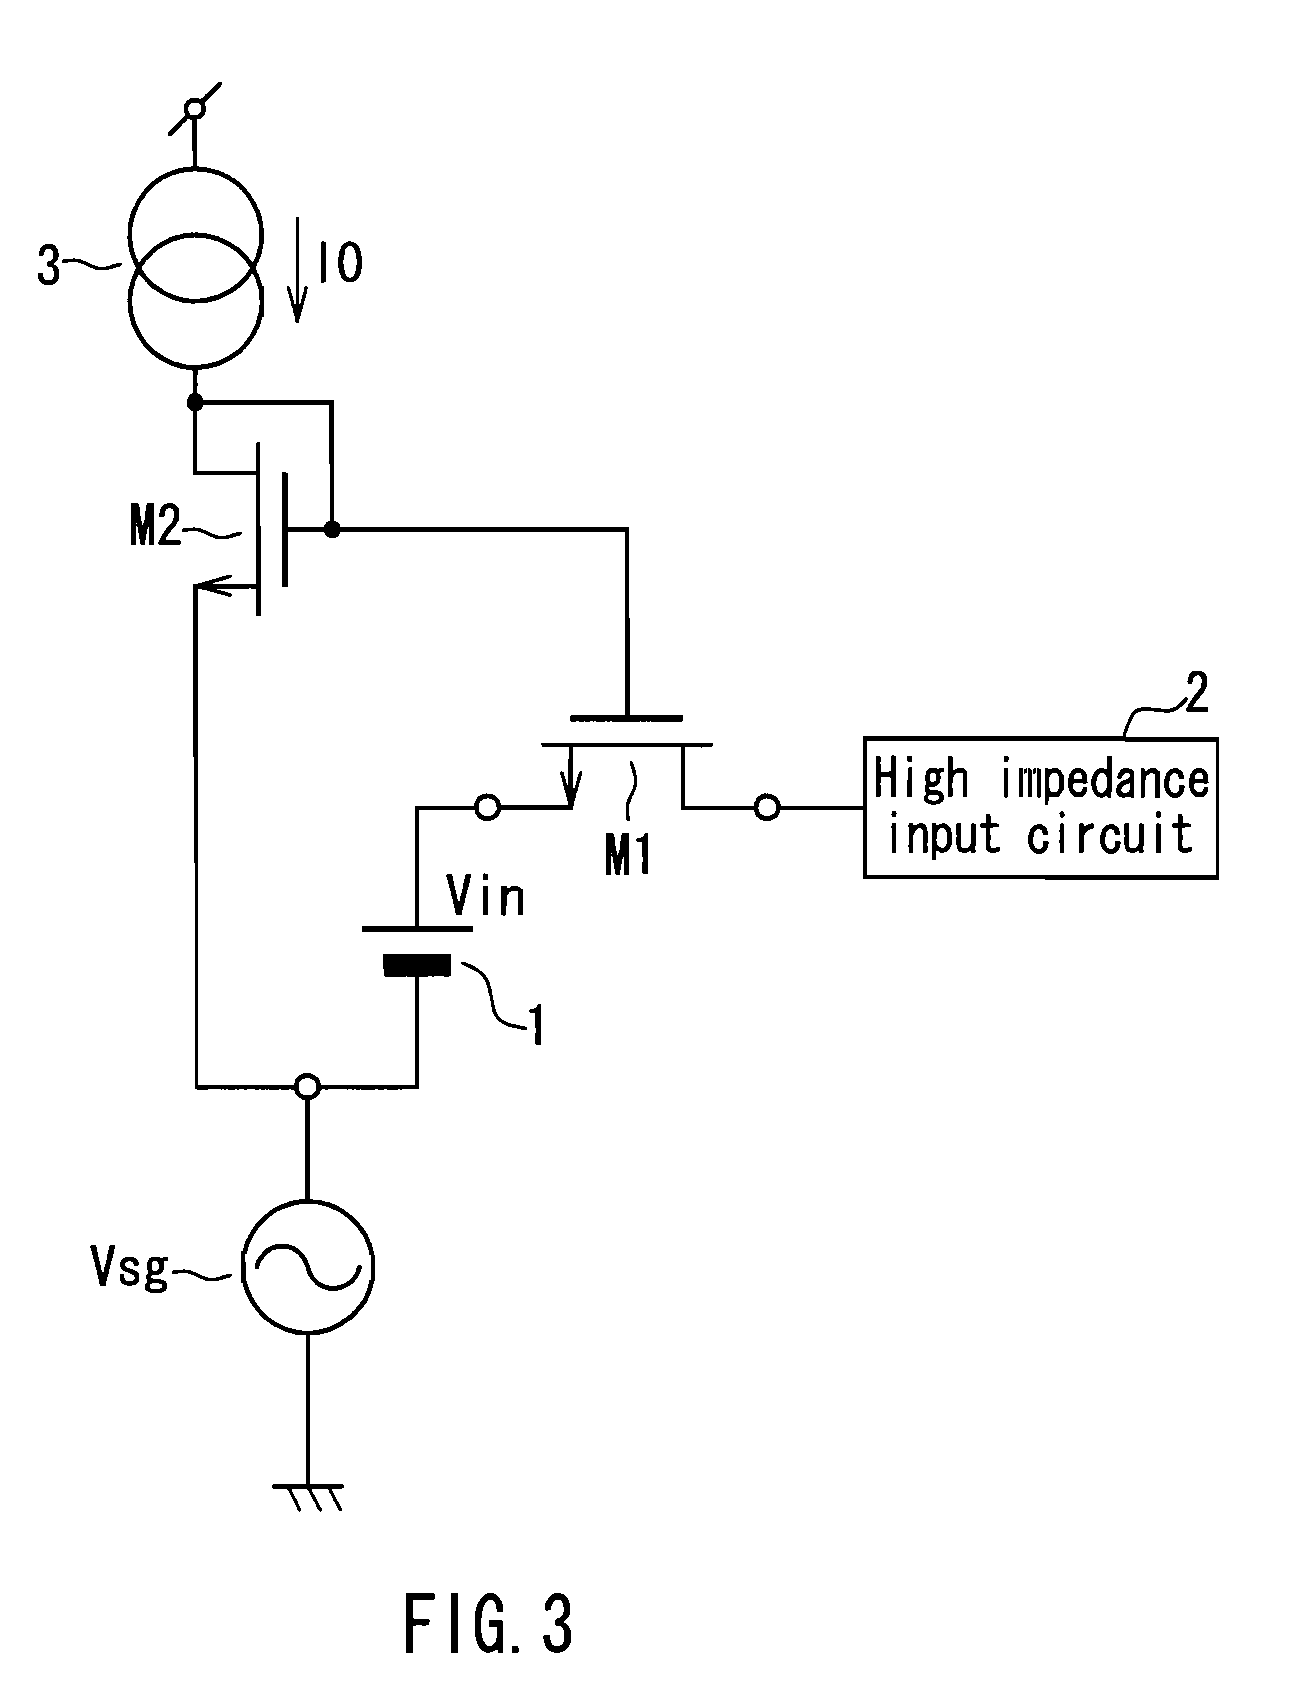 Mos transistor resistor, filter, and integrated circuit